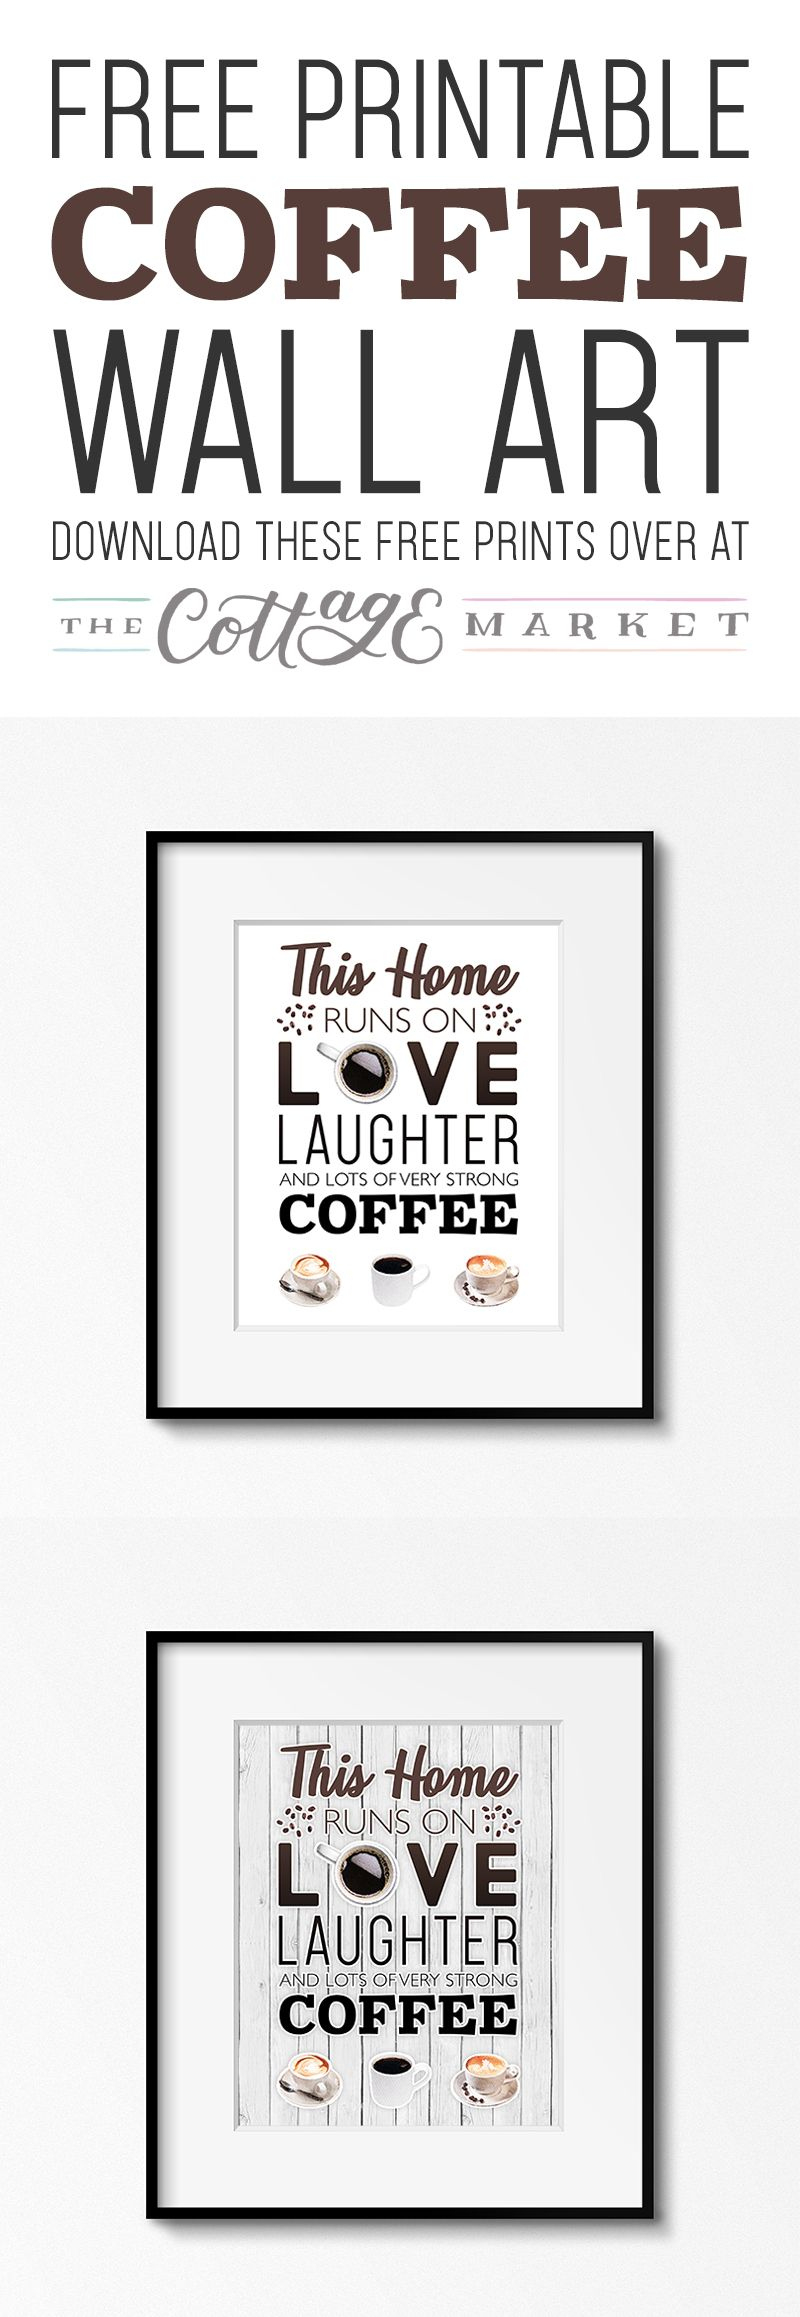 Free Printable Coffee Wall Art - The Cottage Market | Coffee Wall within Free Coffee Printable Art